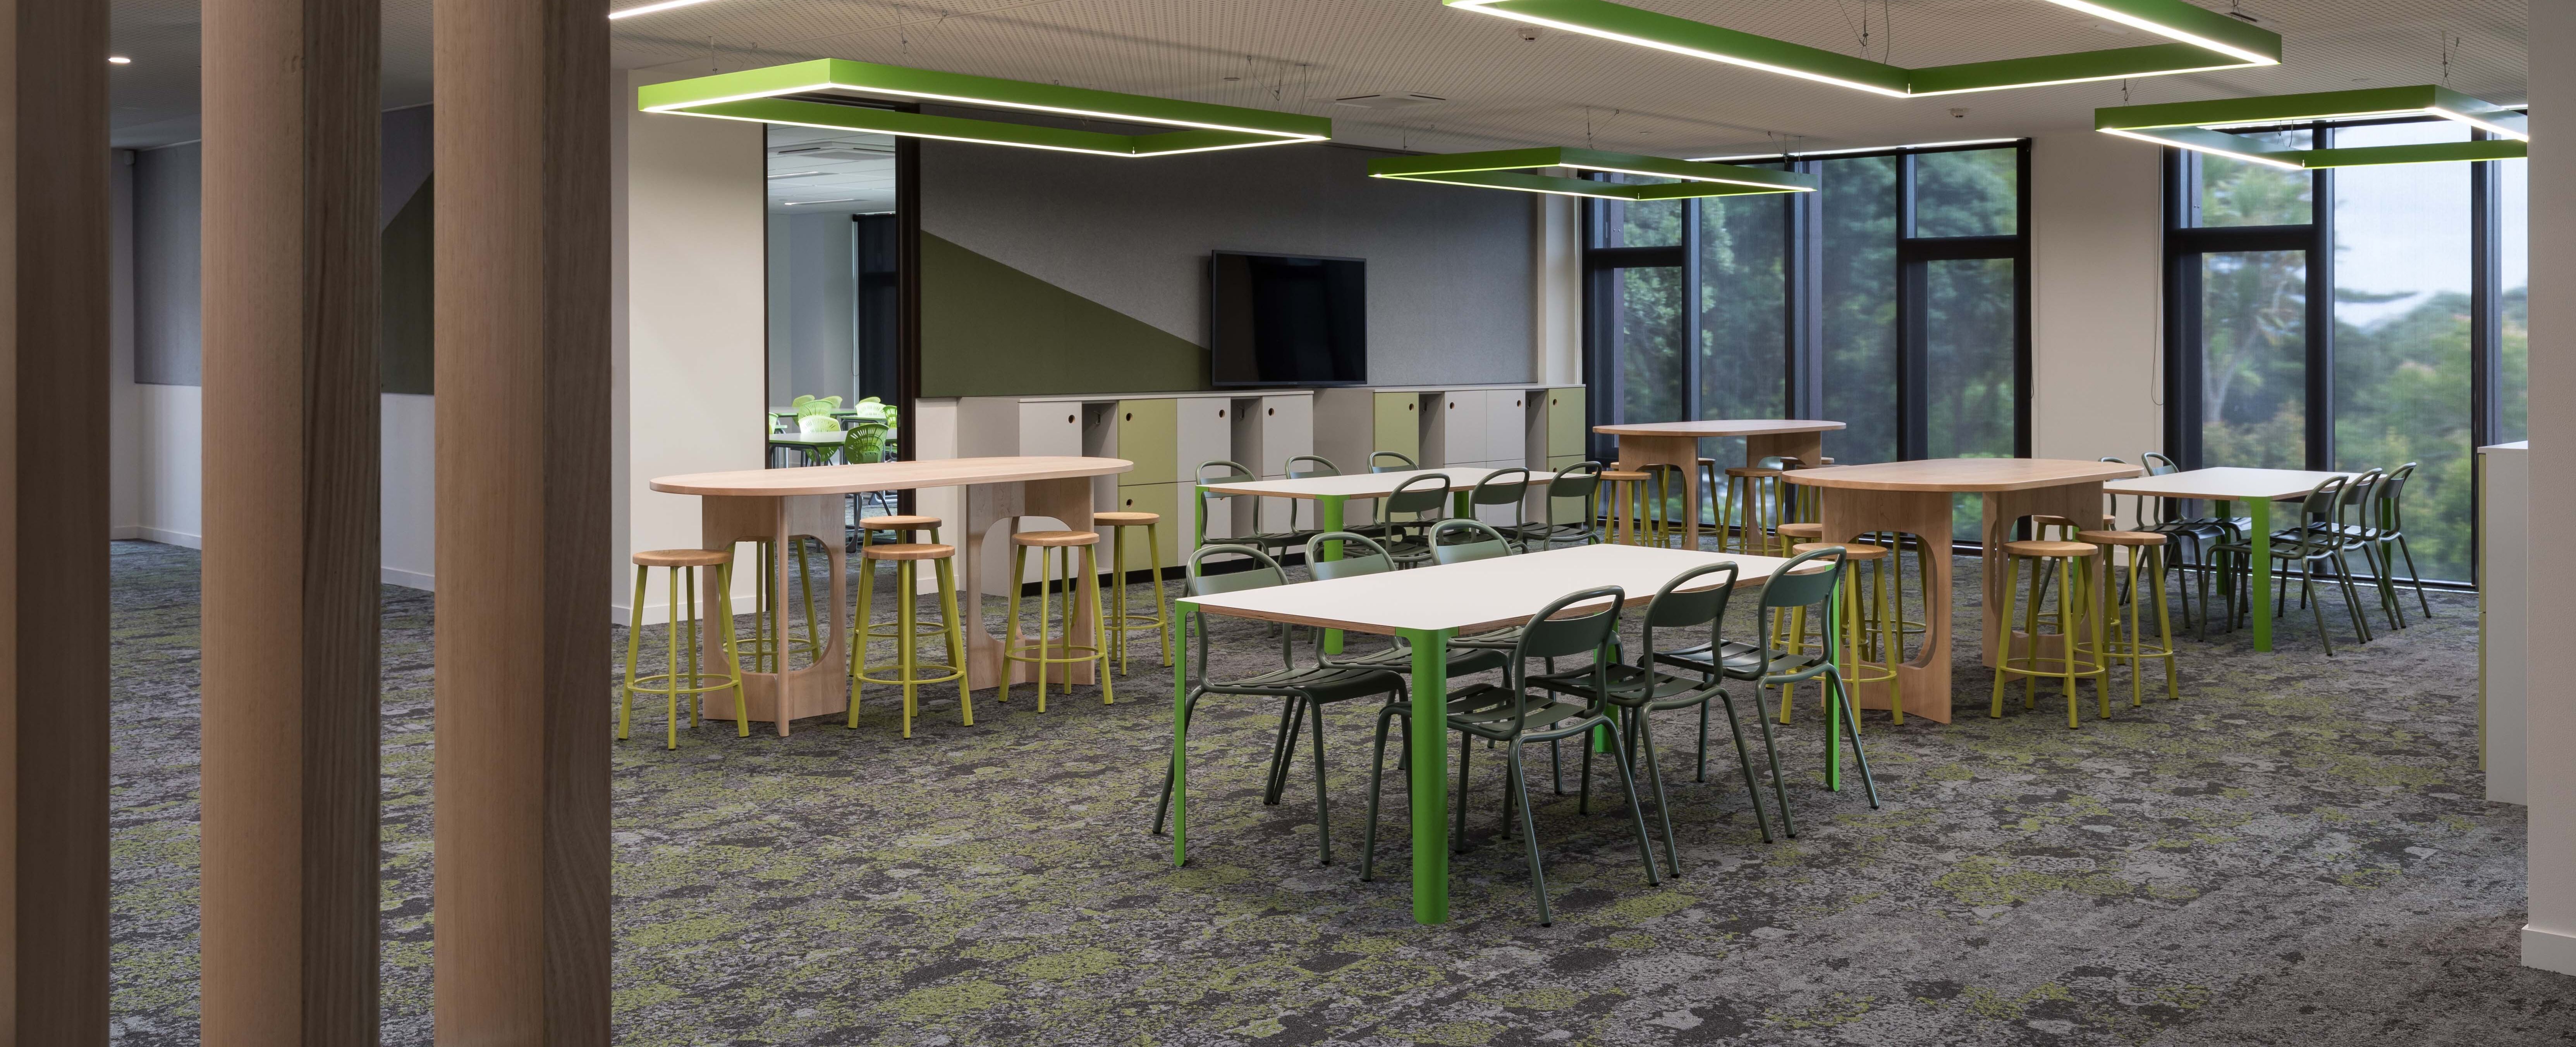 Social space furniture at St Kentigerns Boys' School with interior by Outline Design.